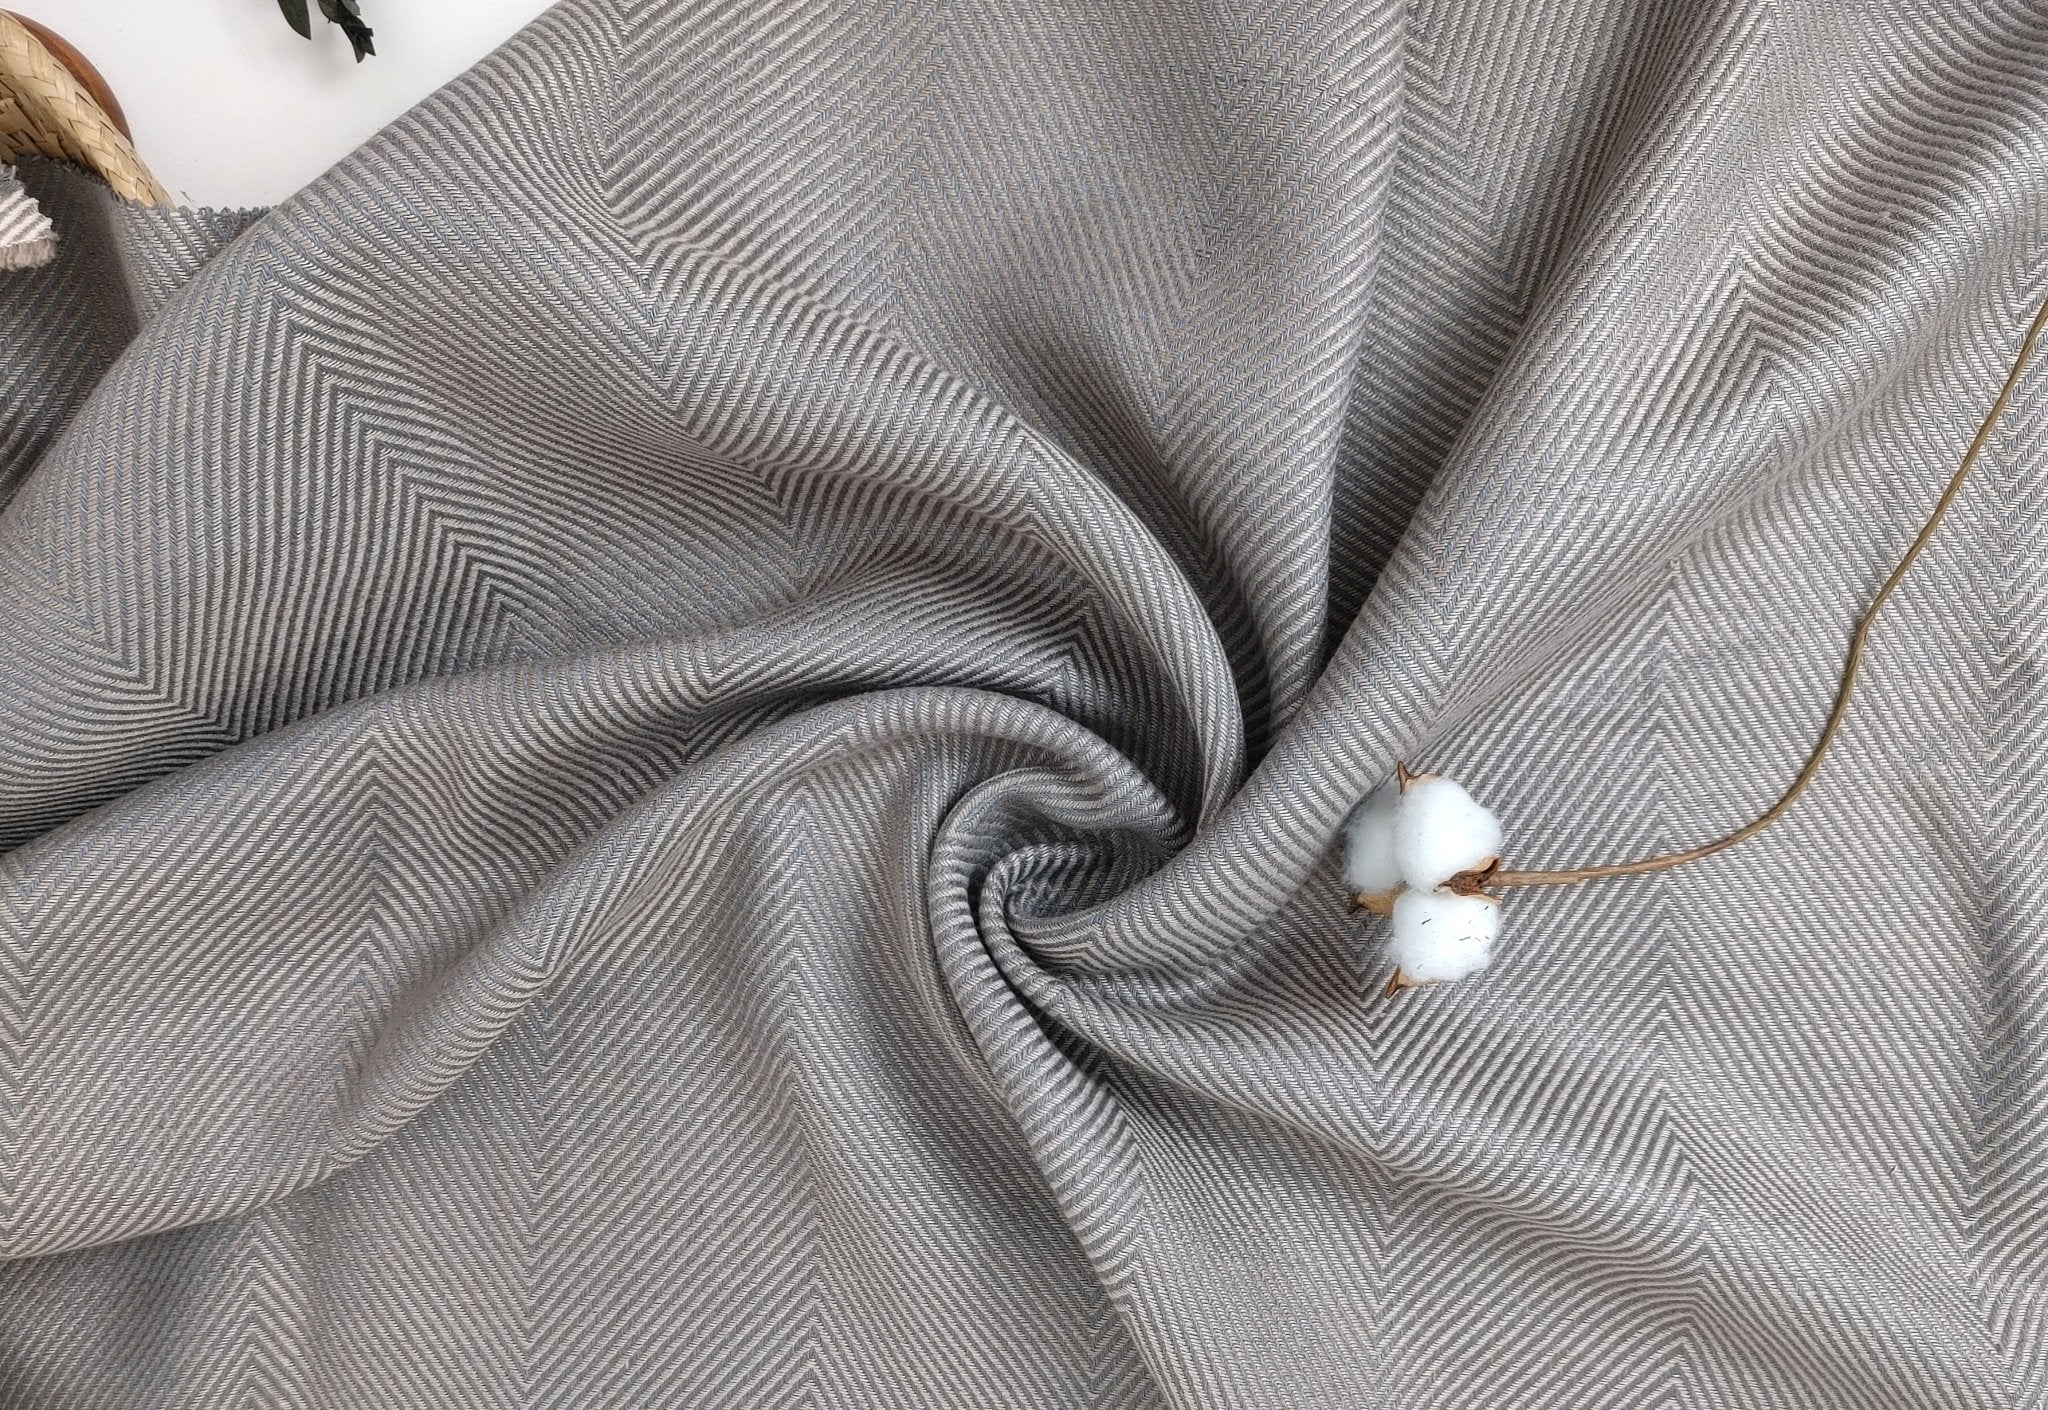 Luxurious Linen-Rayon HBT Fabric: Big Size with Two-Tone Chambray Design 6062 6063 - The Linen Lab - Beige